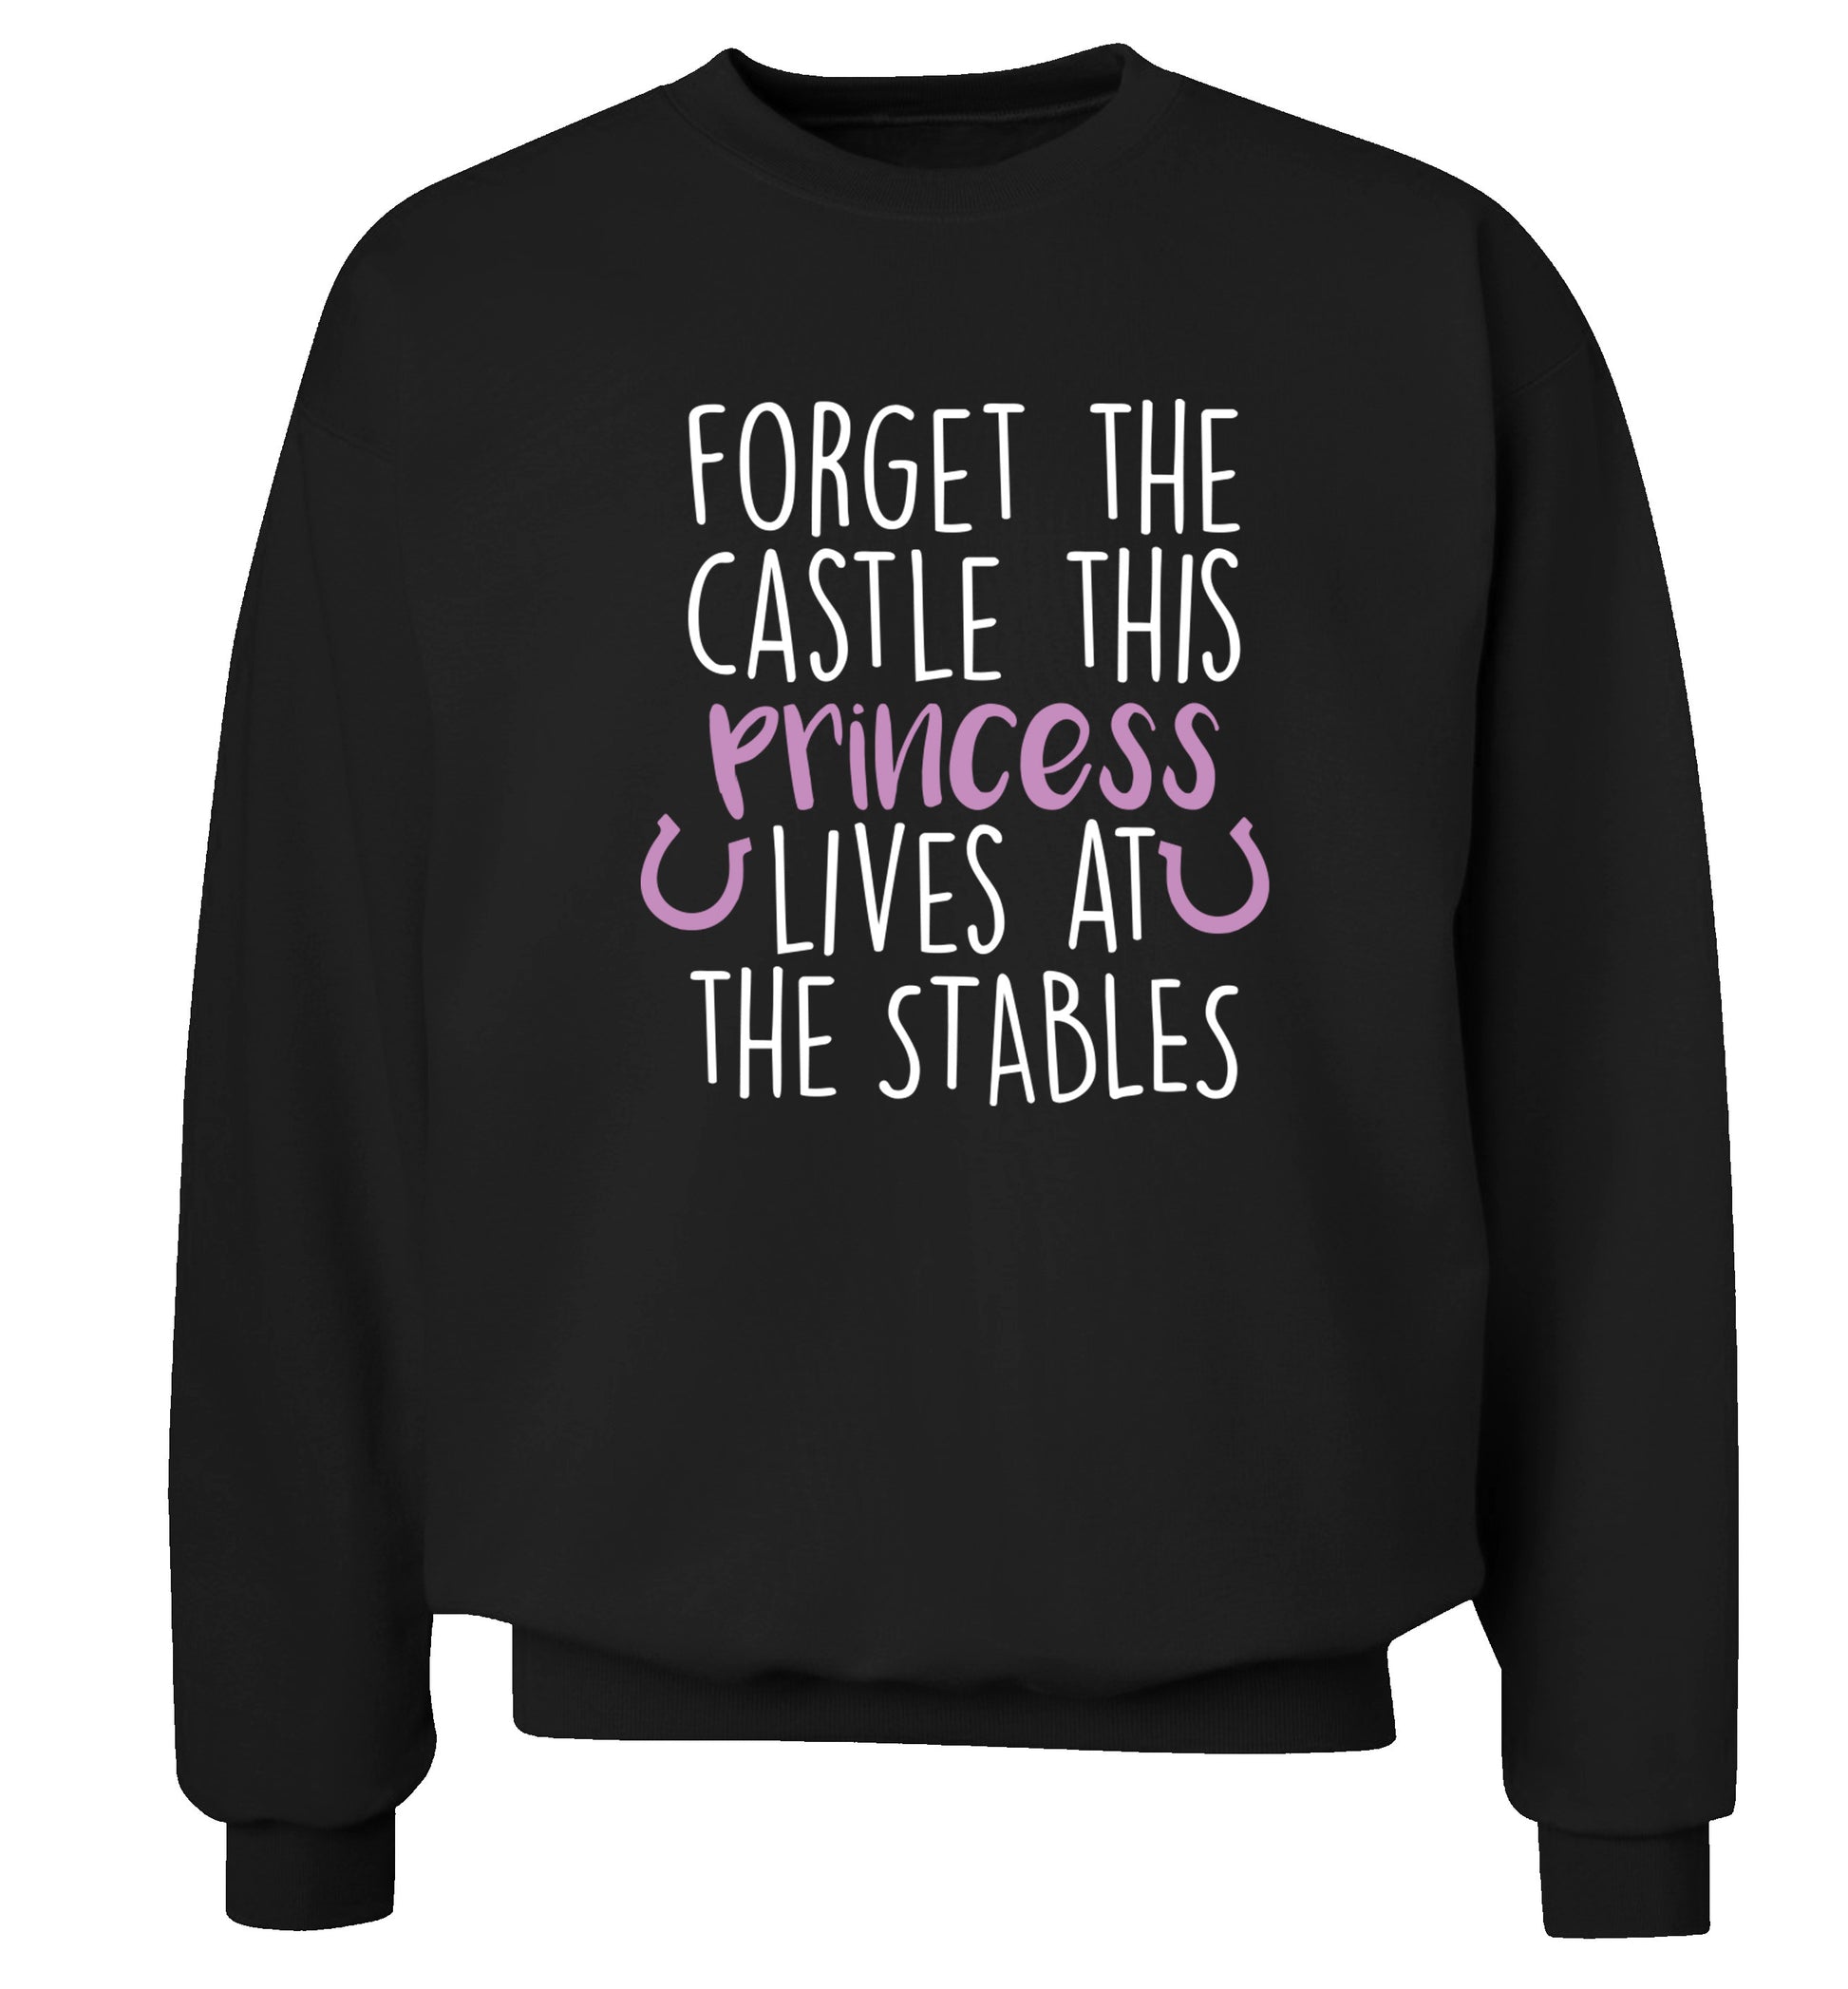 Forget the castle this princess lives at the stables Adult's unisex black Sweater 2XL